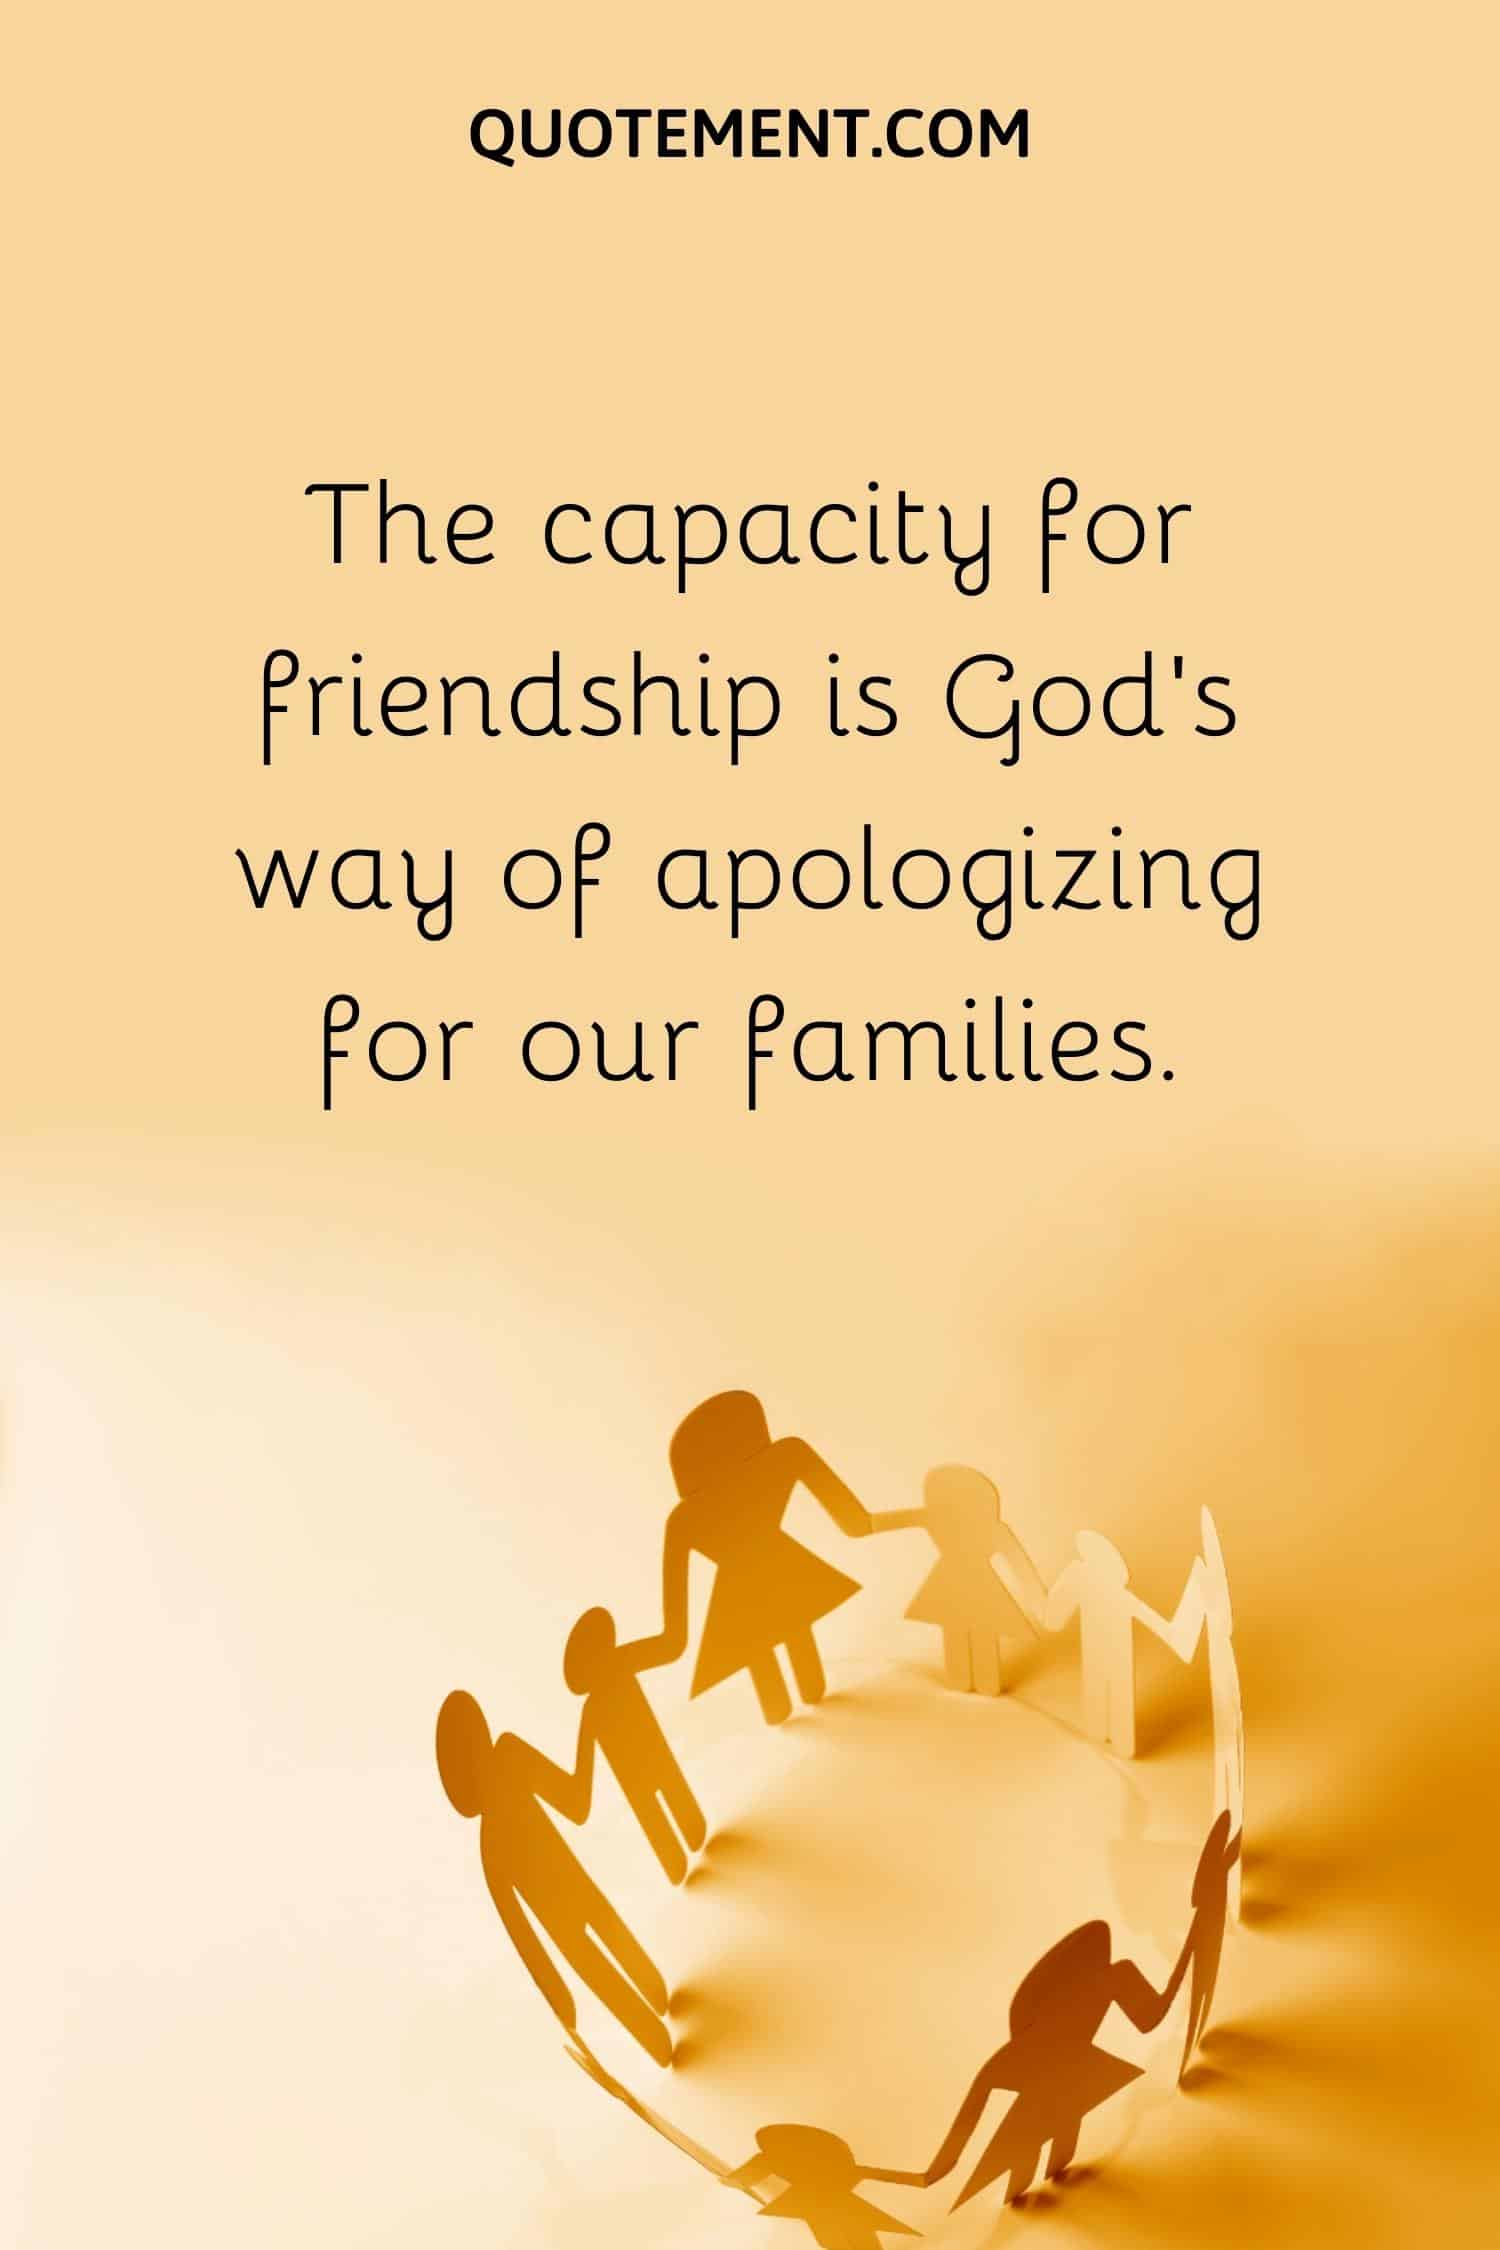 The capacity for friendship is God's way of apologizing for our families